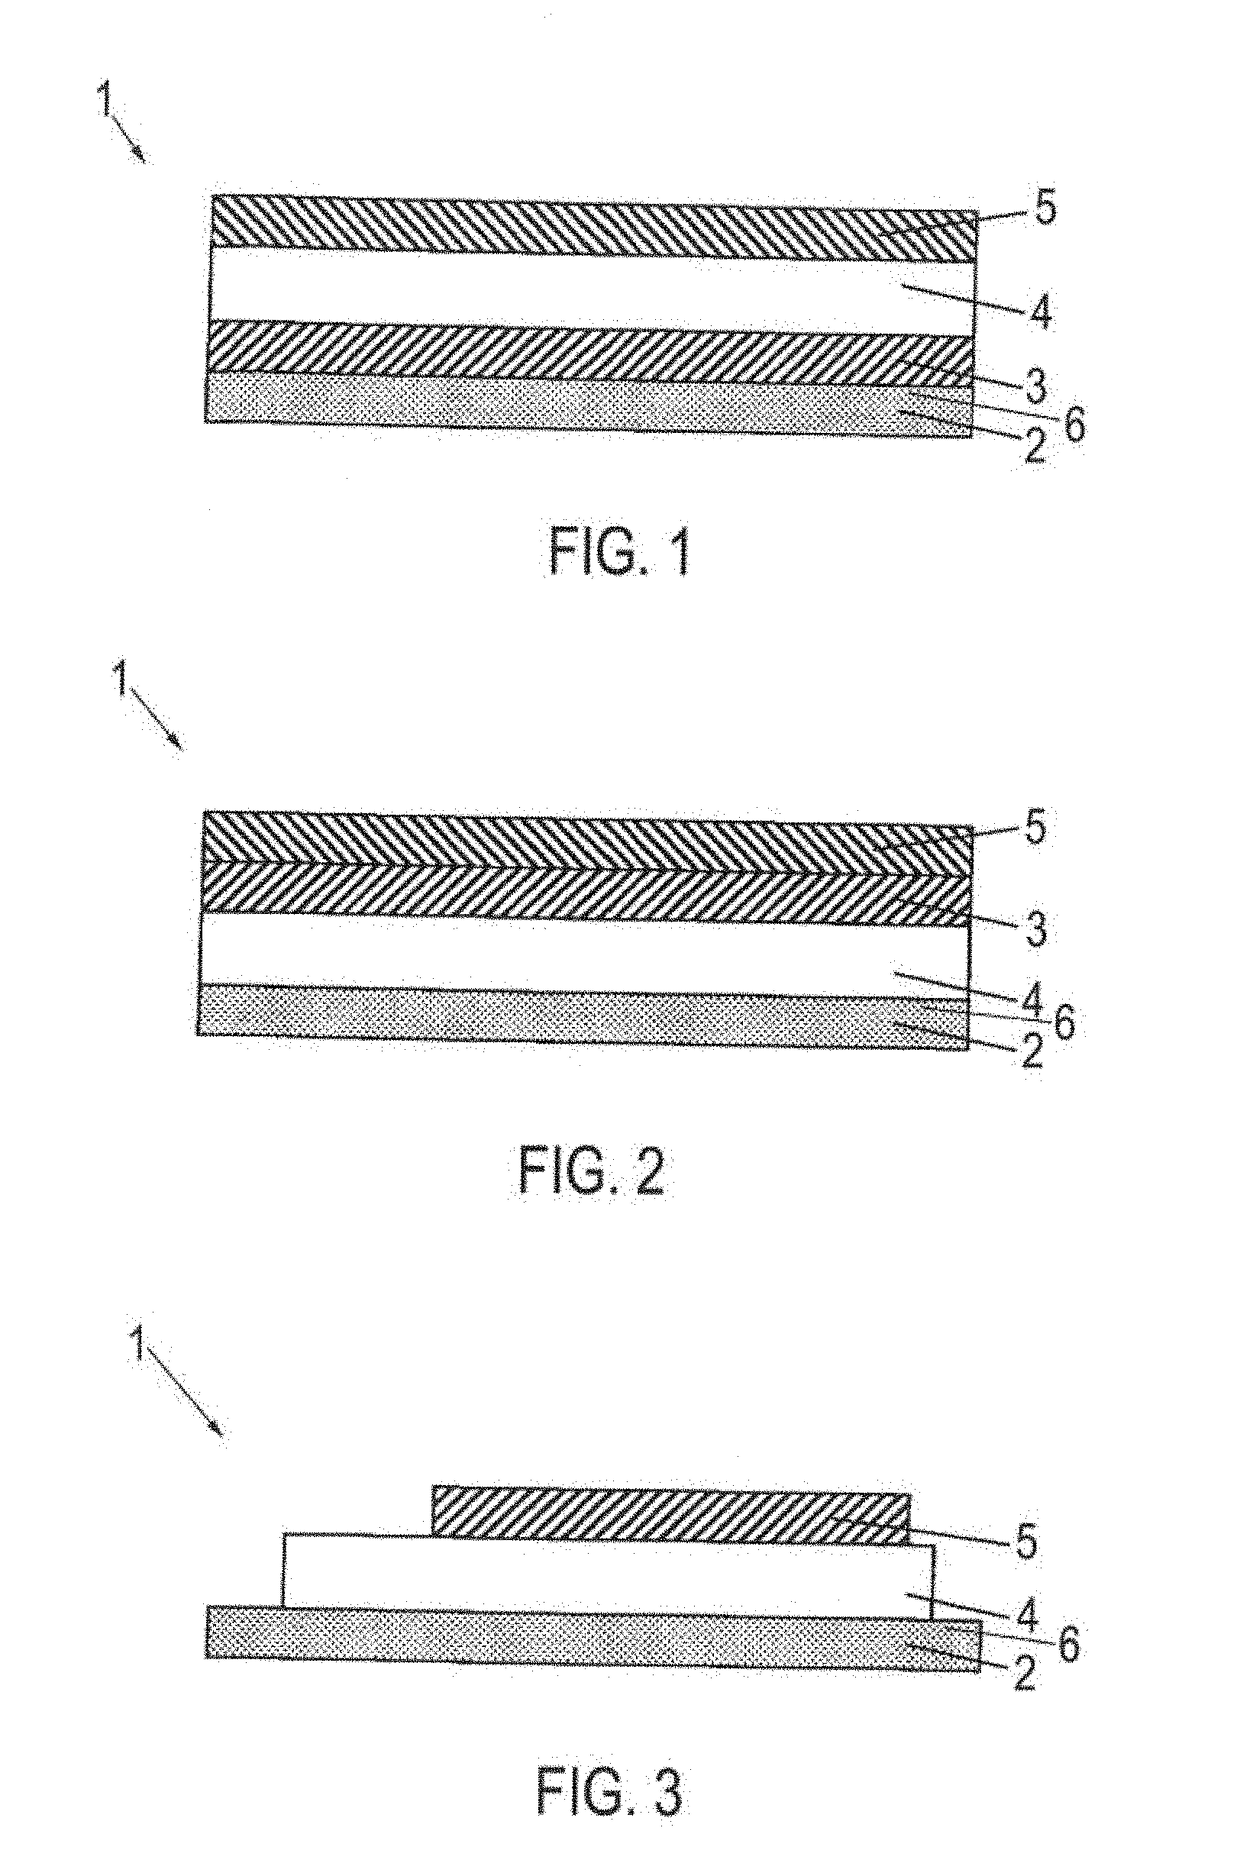 Electrical contact composites and method for producing electrical contact composites